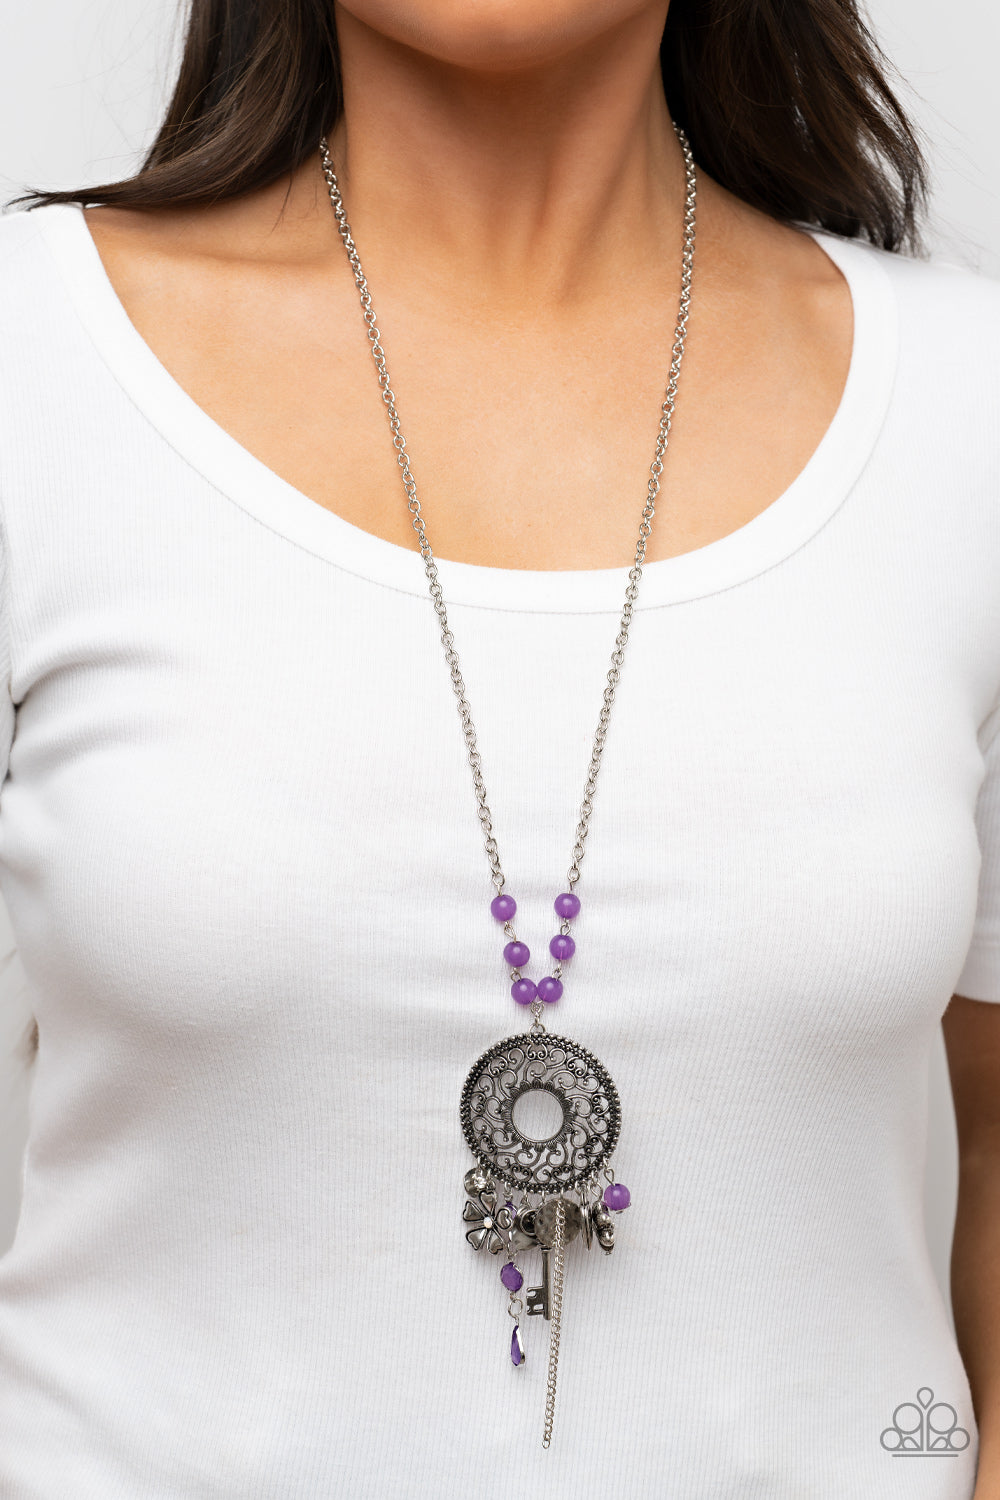 Trinket Necklace 2 Purple · A Chain Necklace · Jewelry Making on